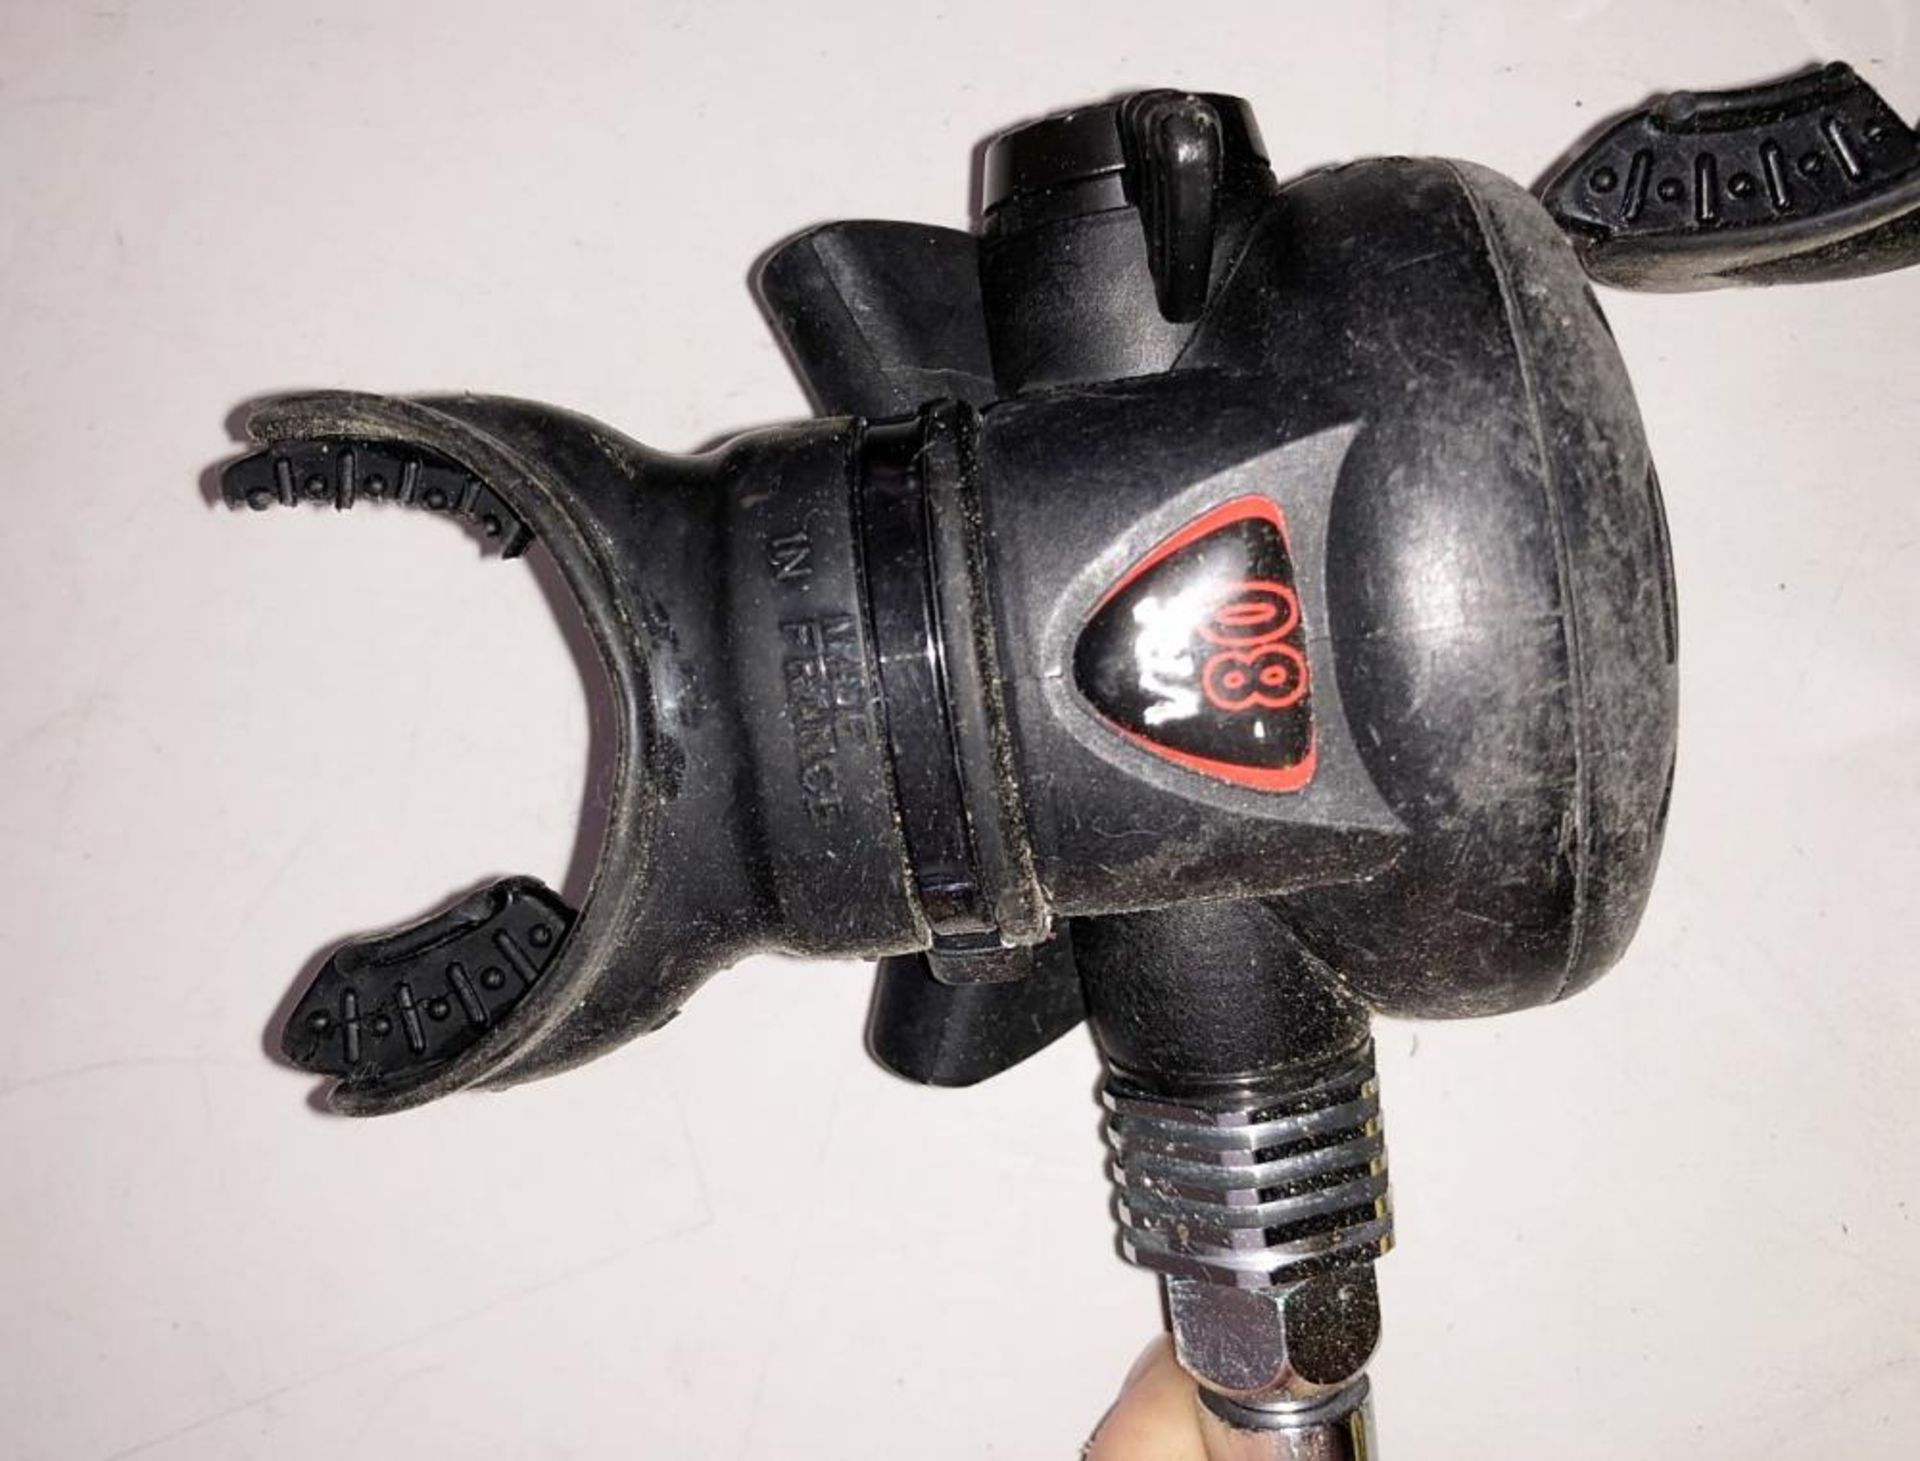 Beuchat Scuba Air Cylinder and a Full Regulator Set - Ref: NS114, NS321 - CL349 - Altrincham WA14 - Image 6 of 12